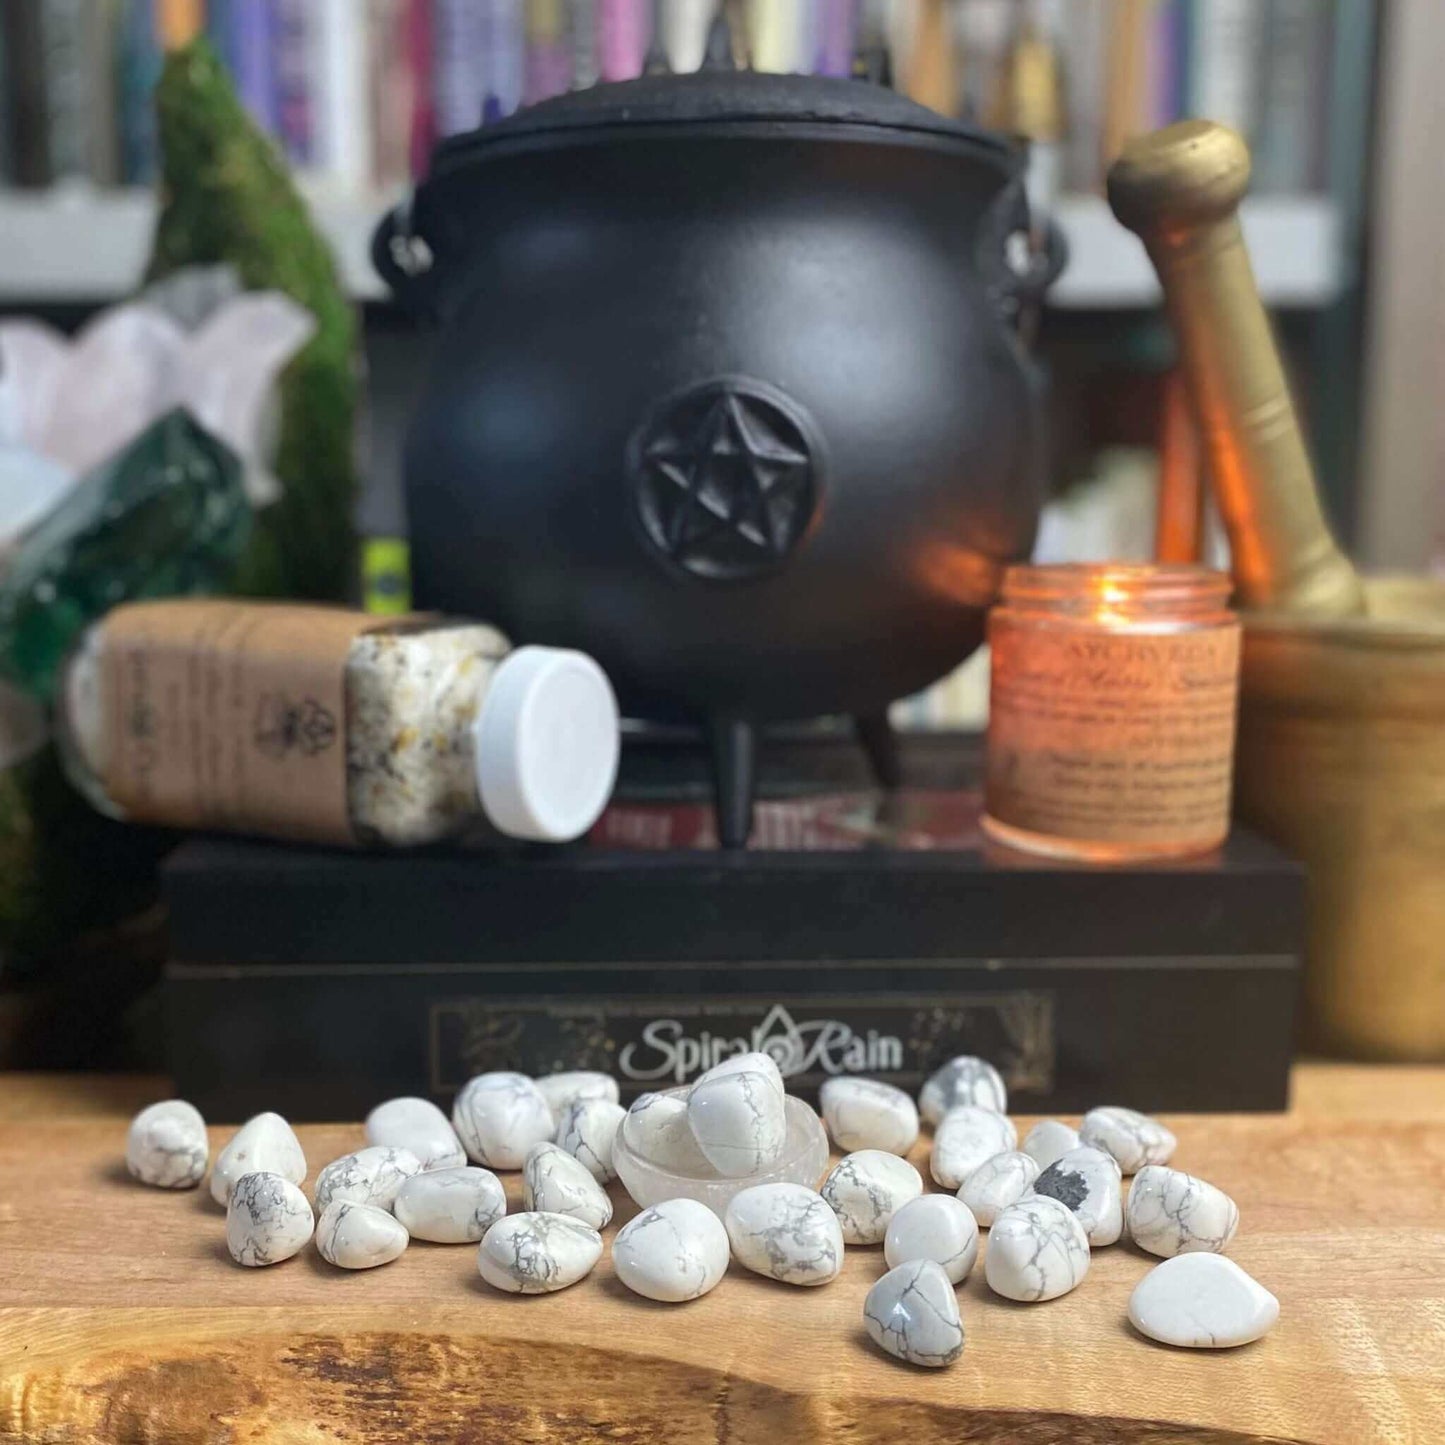 Howlite Tumbled at $3 only from Spiral Rain